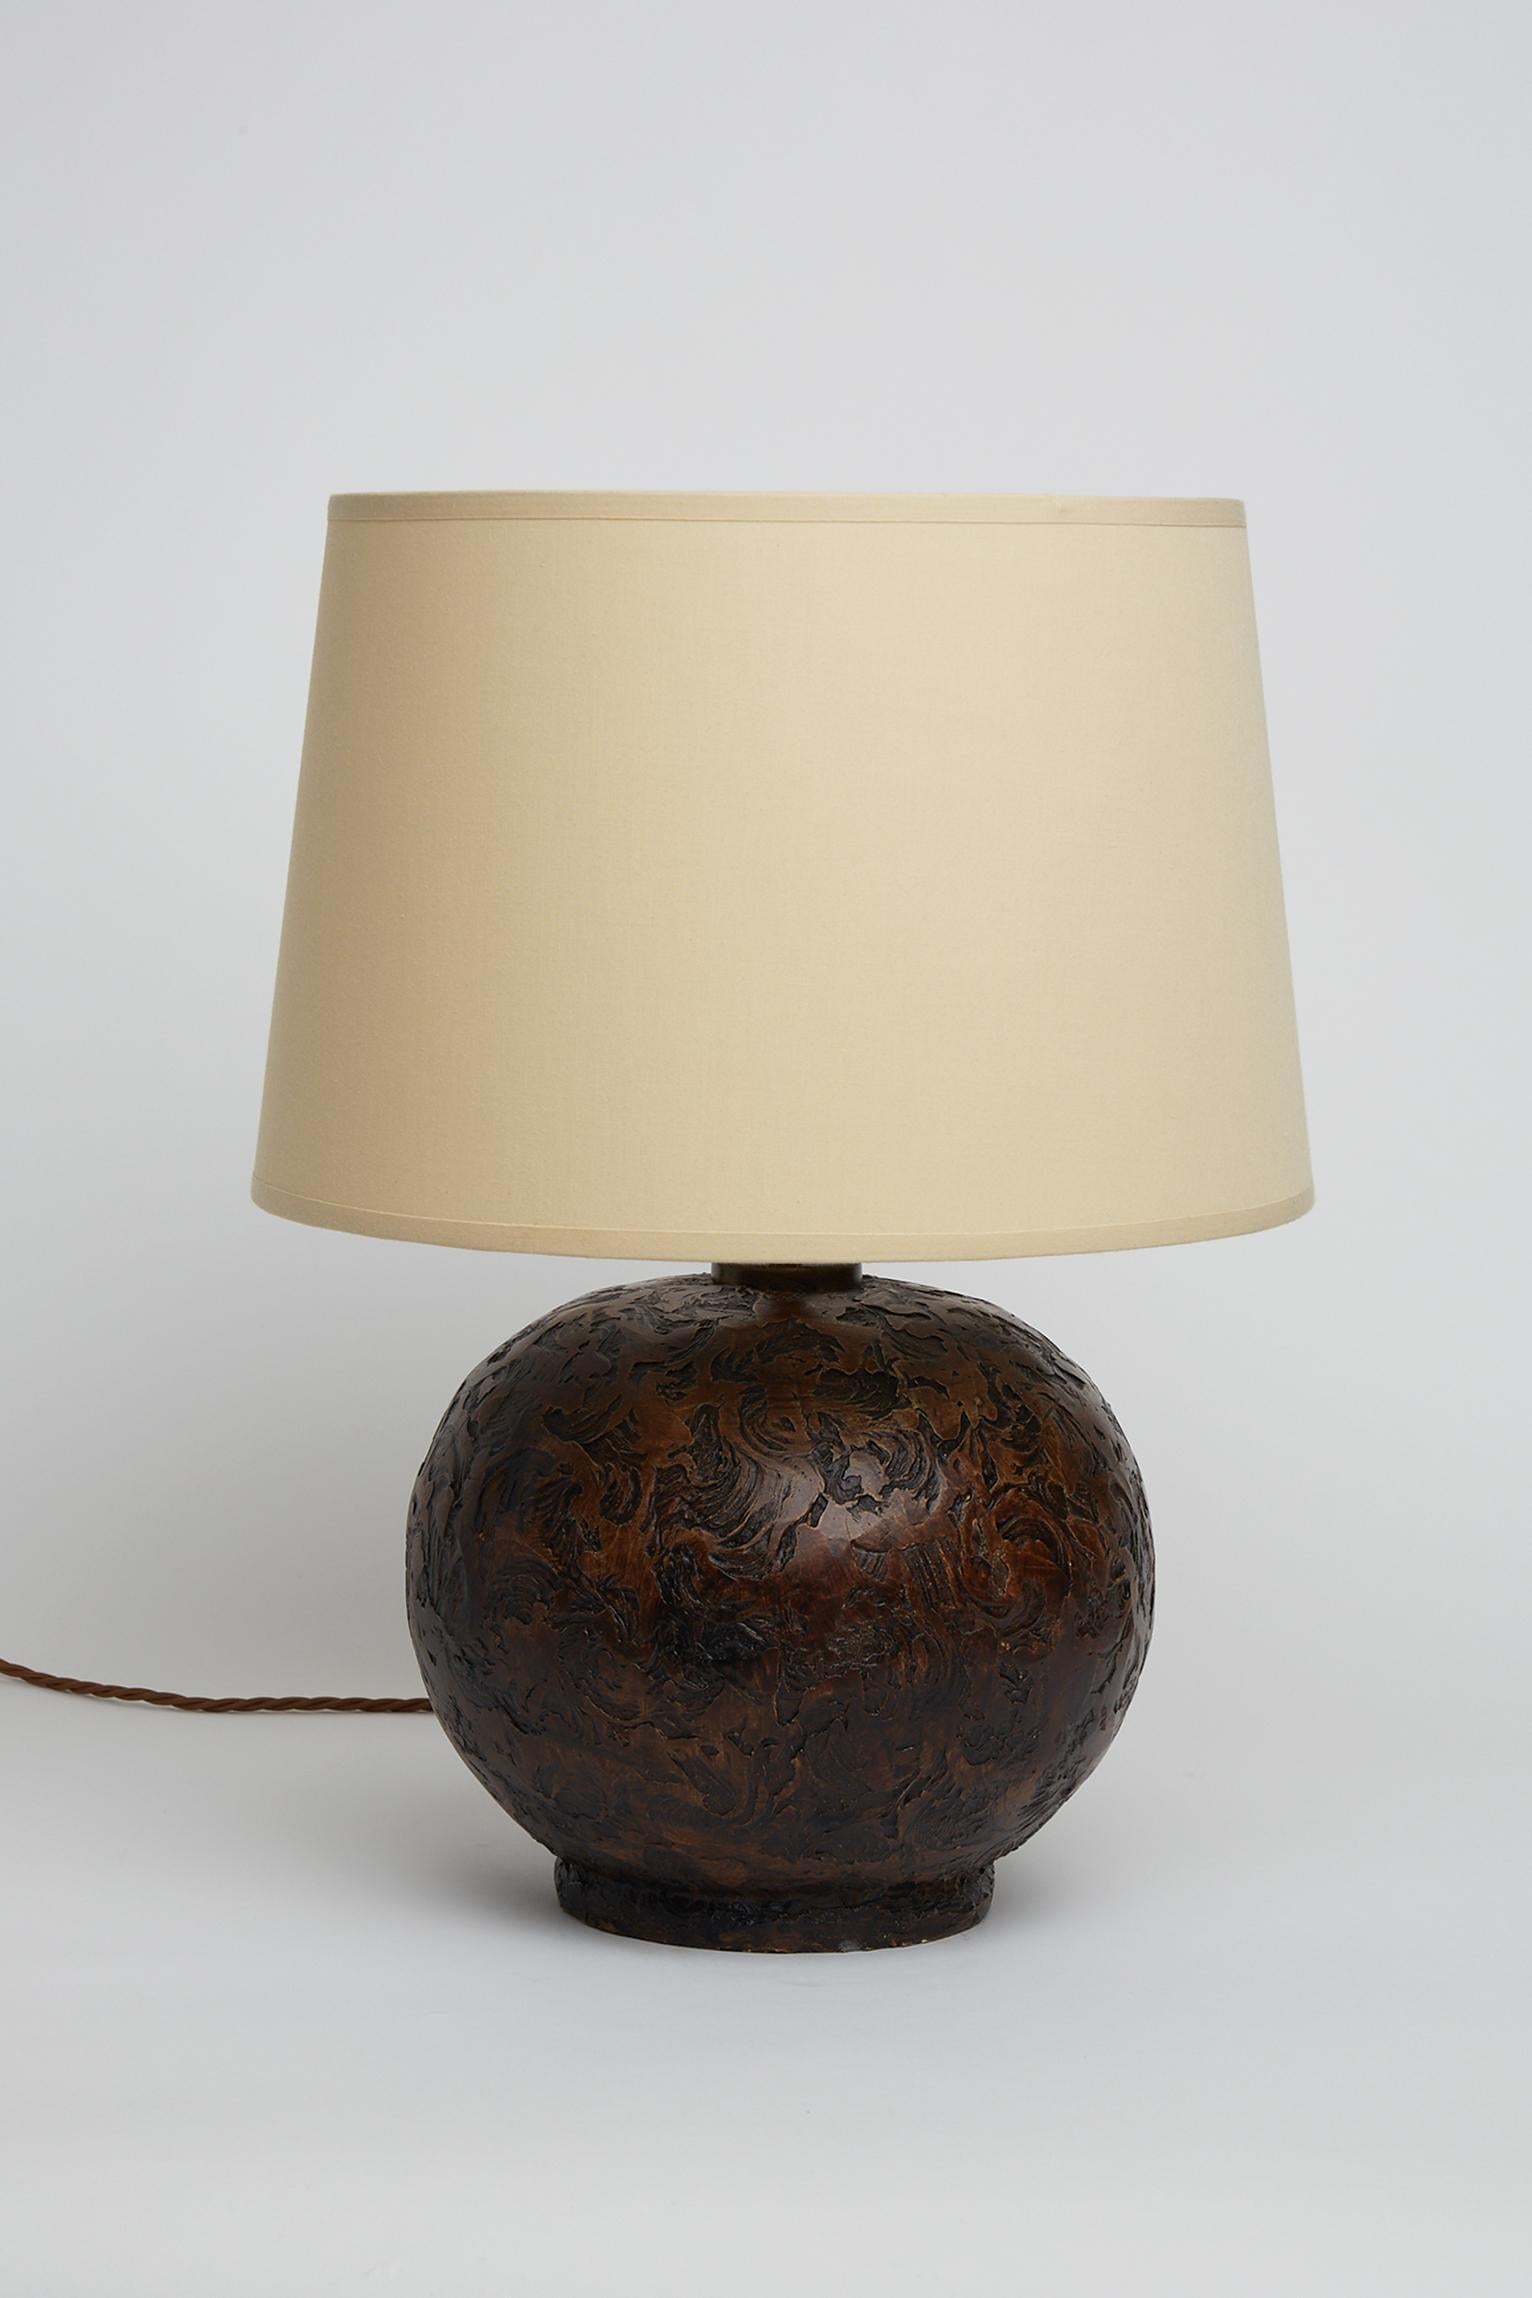 An Art Deco highly textured ceramic table lamp.
France, Circa 1940.
Measures: With the shade: 48 cm high by 31 cm diameter.
Lamp base only: 30 cm high by 25 cm diameter.